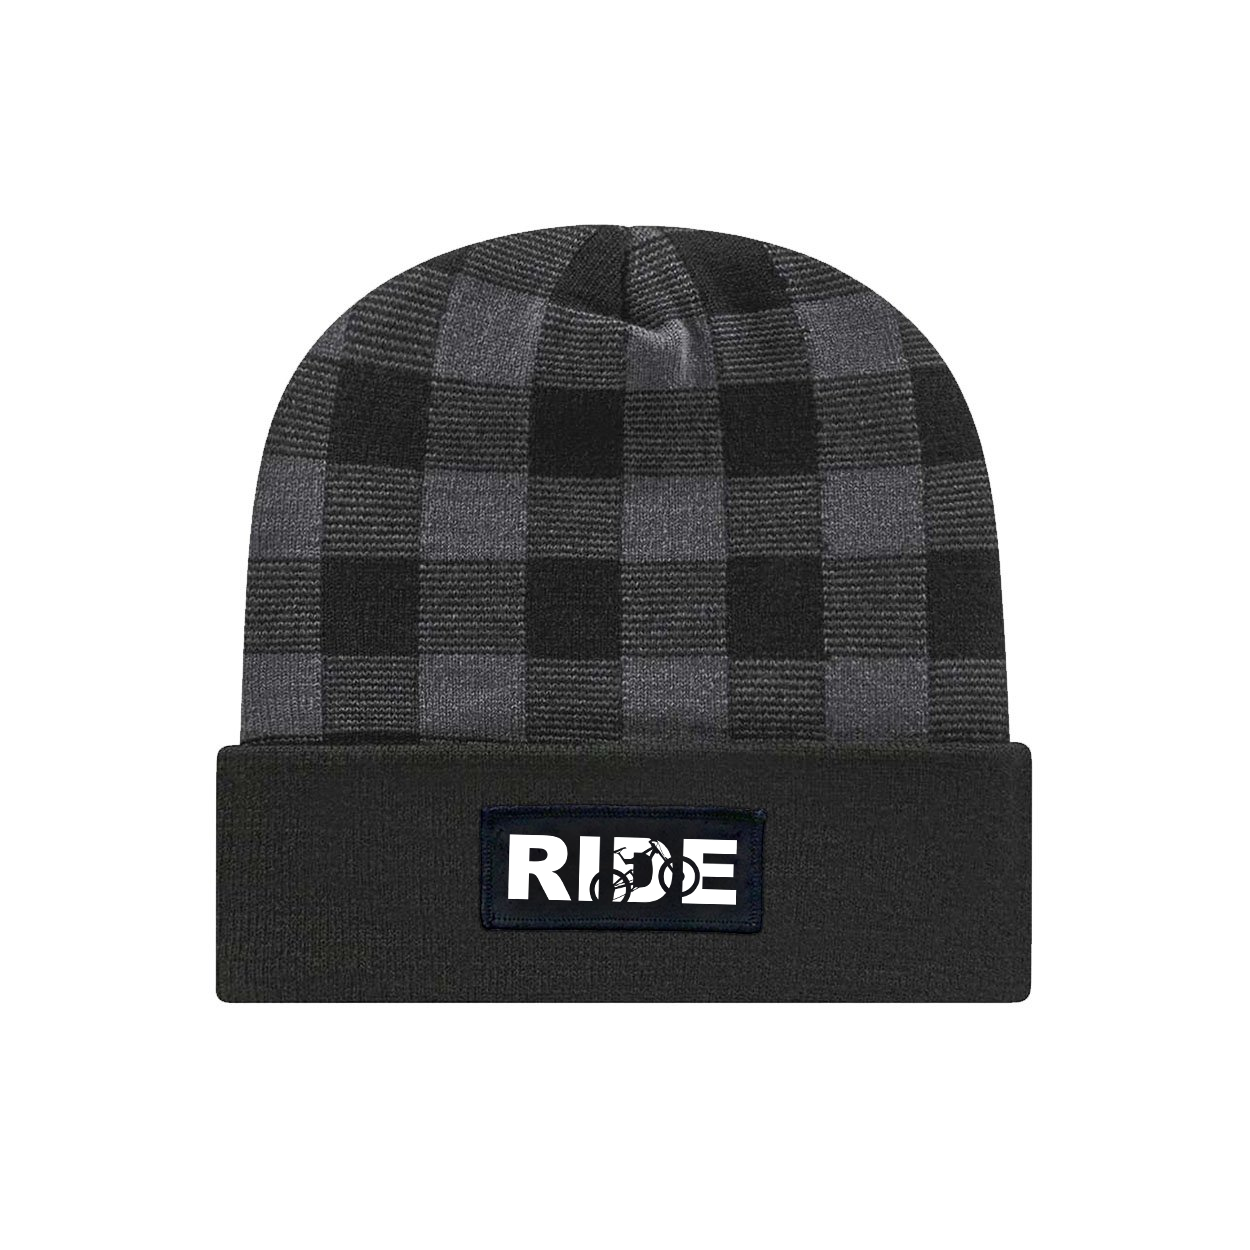 Ride MTB Logo Night Out Woven Patch Roll Up Plaid Beanie Black/Heather Gray (White Logo)